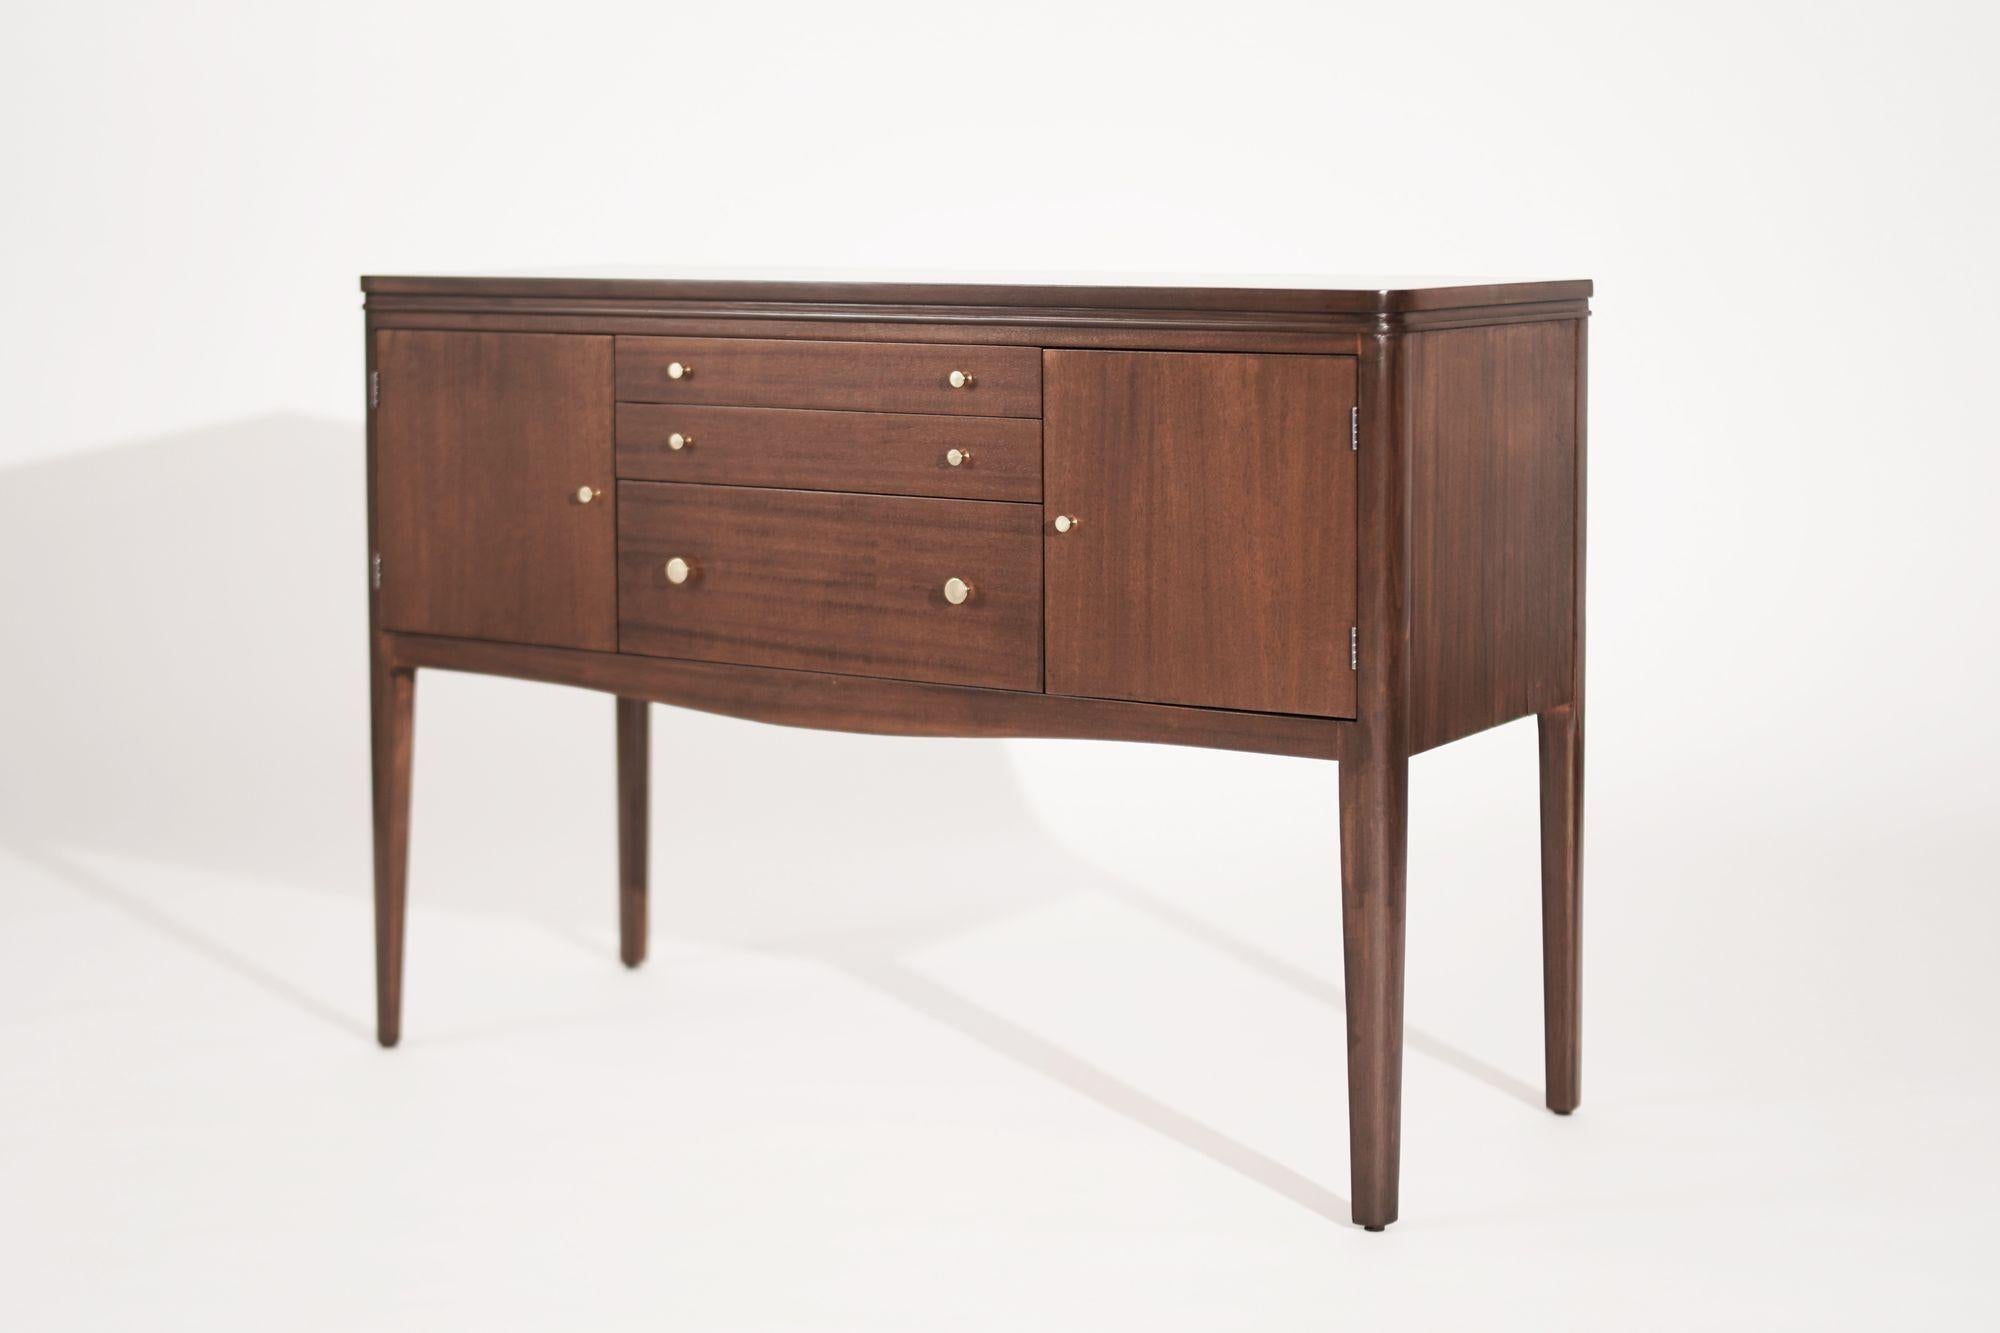 Brass Mid Century Entry Console Table in Mahogany, C. 1950s For Sale